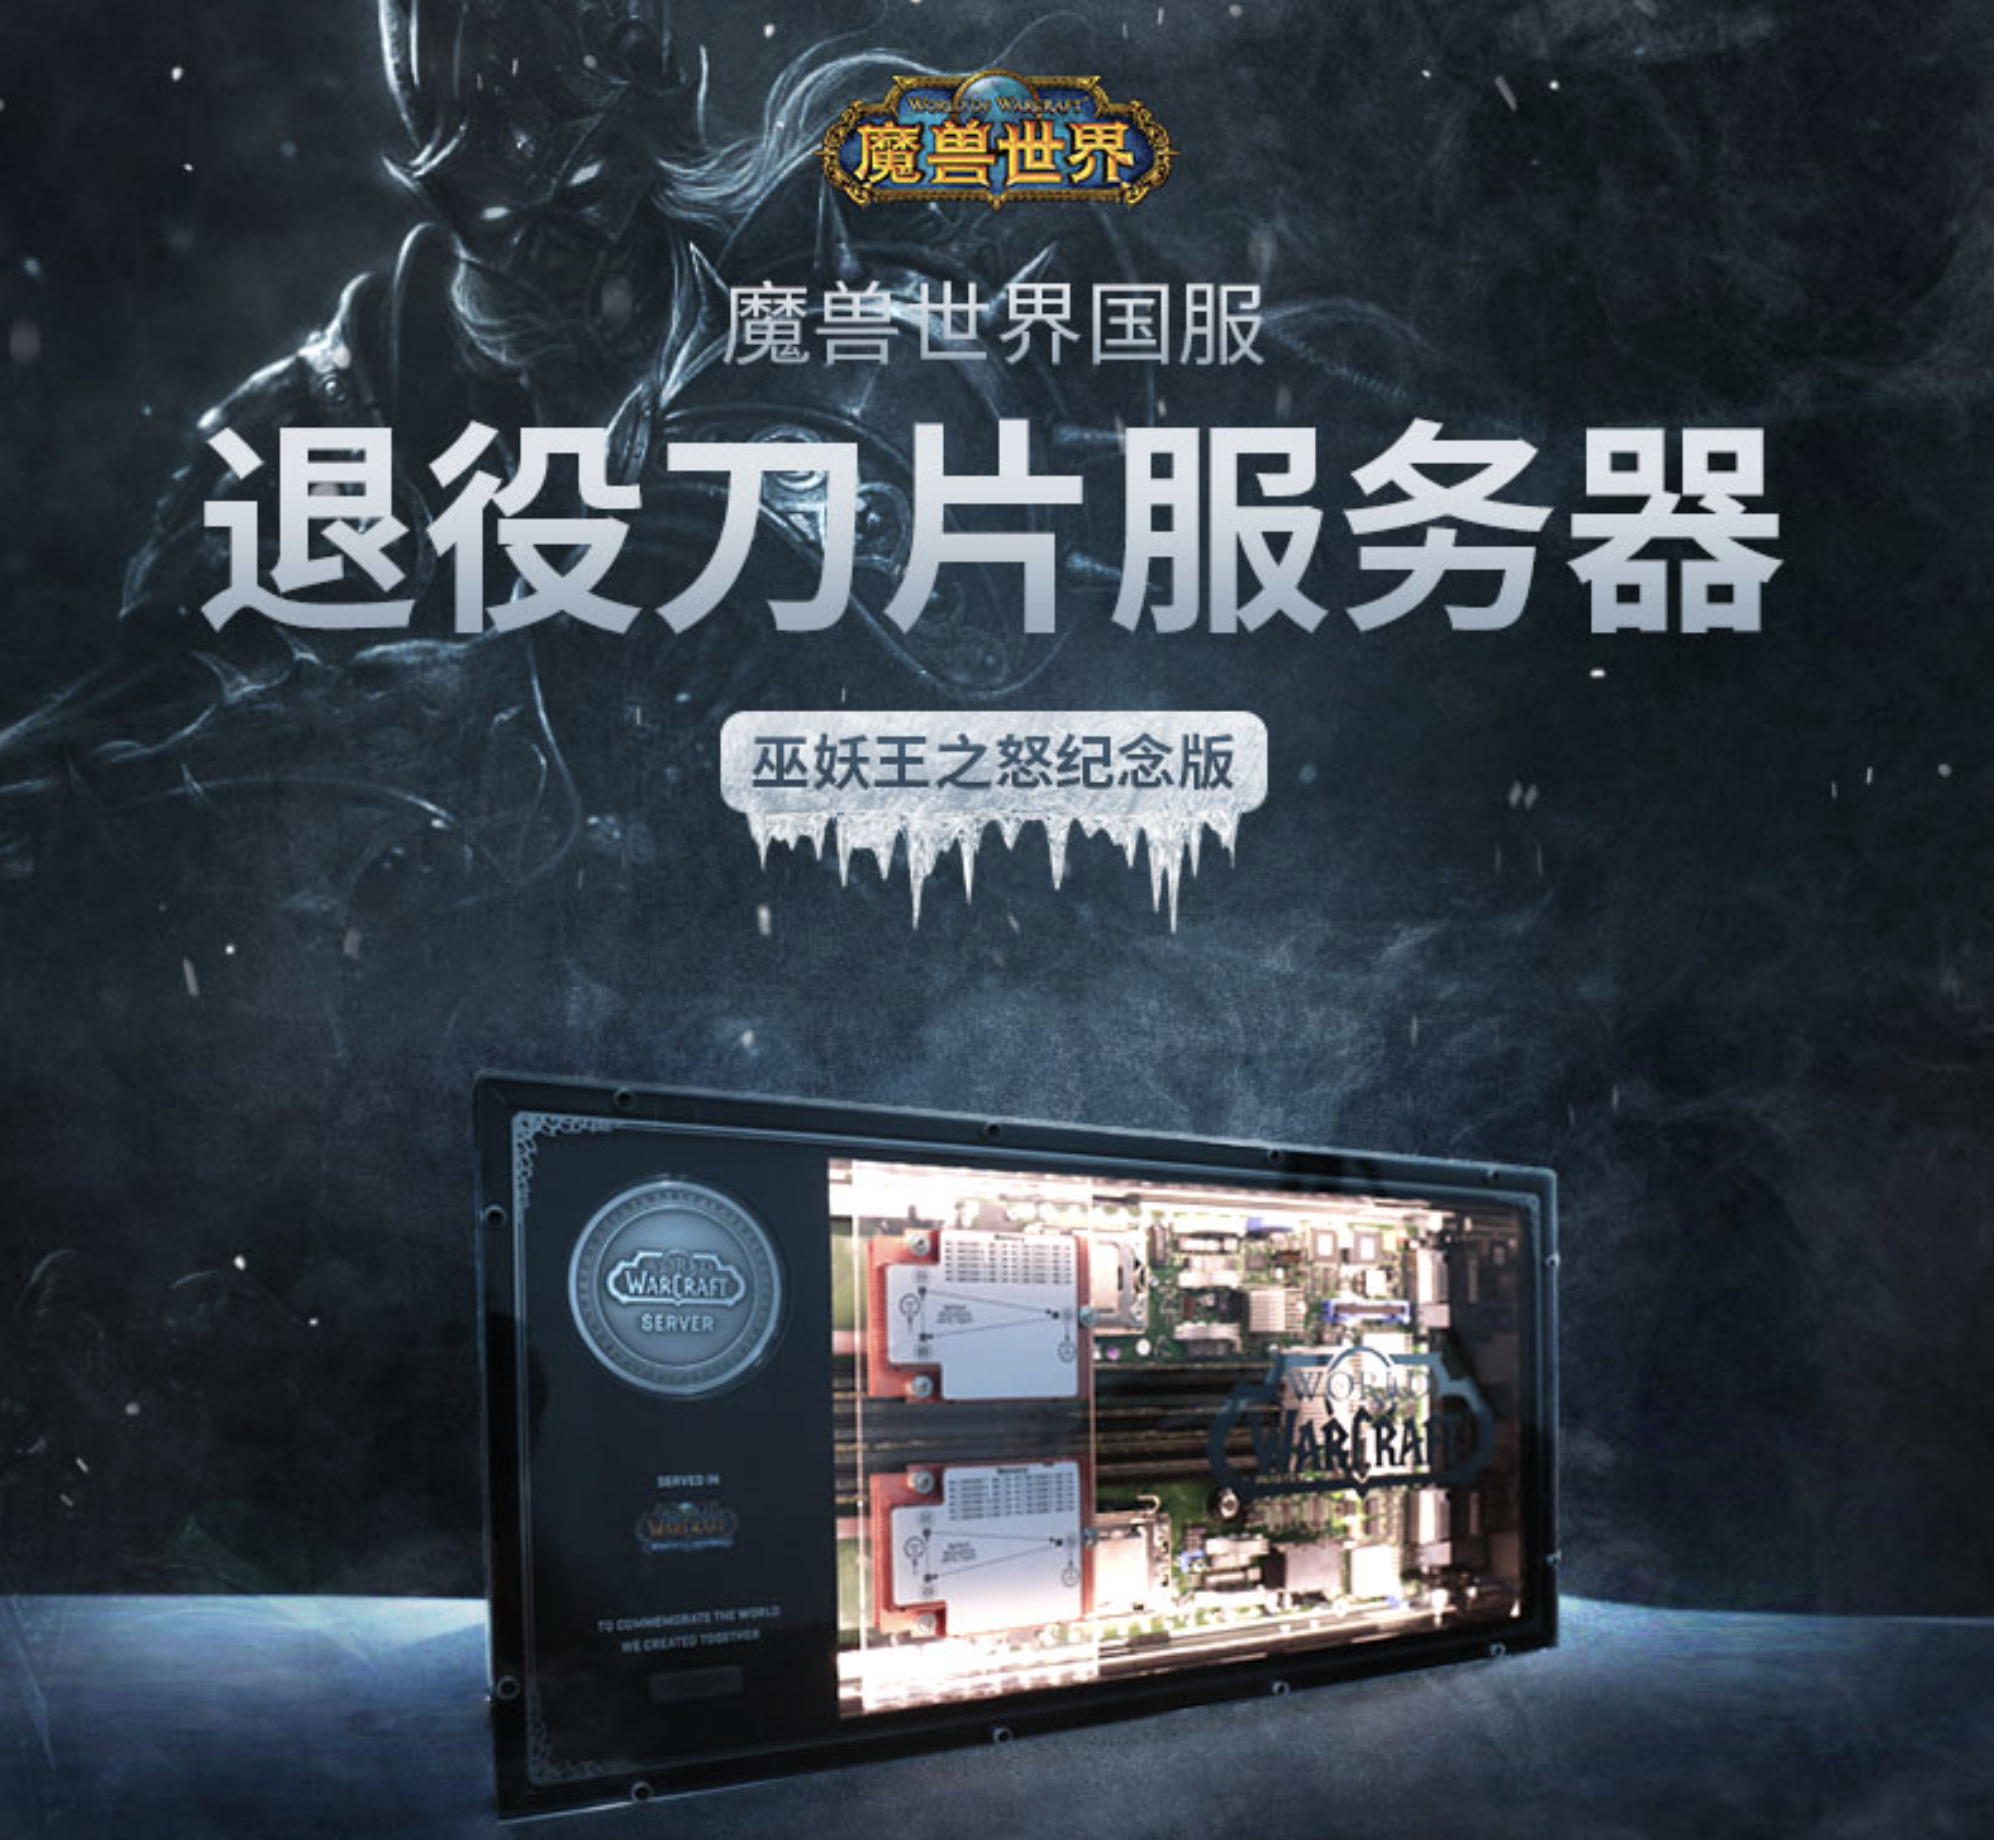 Blizzard sells retired World of Warcraft servers in China